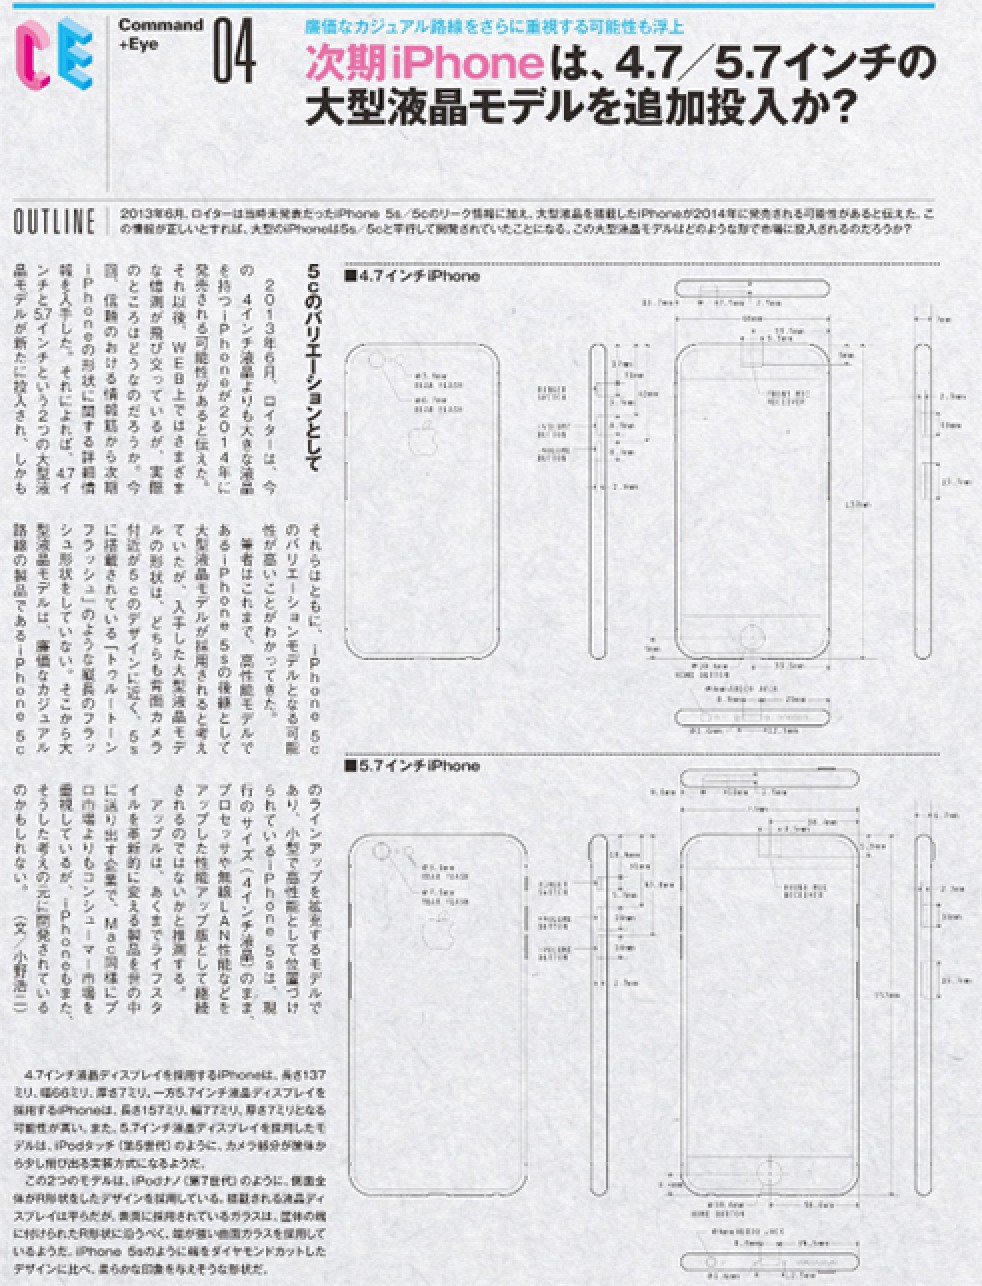 Drawings of Alleged 4.7-Inch and 5.7-Inch iPhone 6c Models